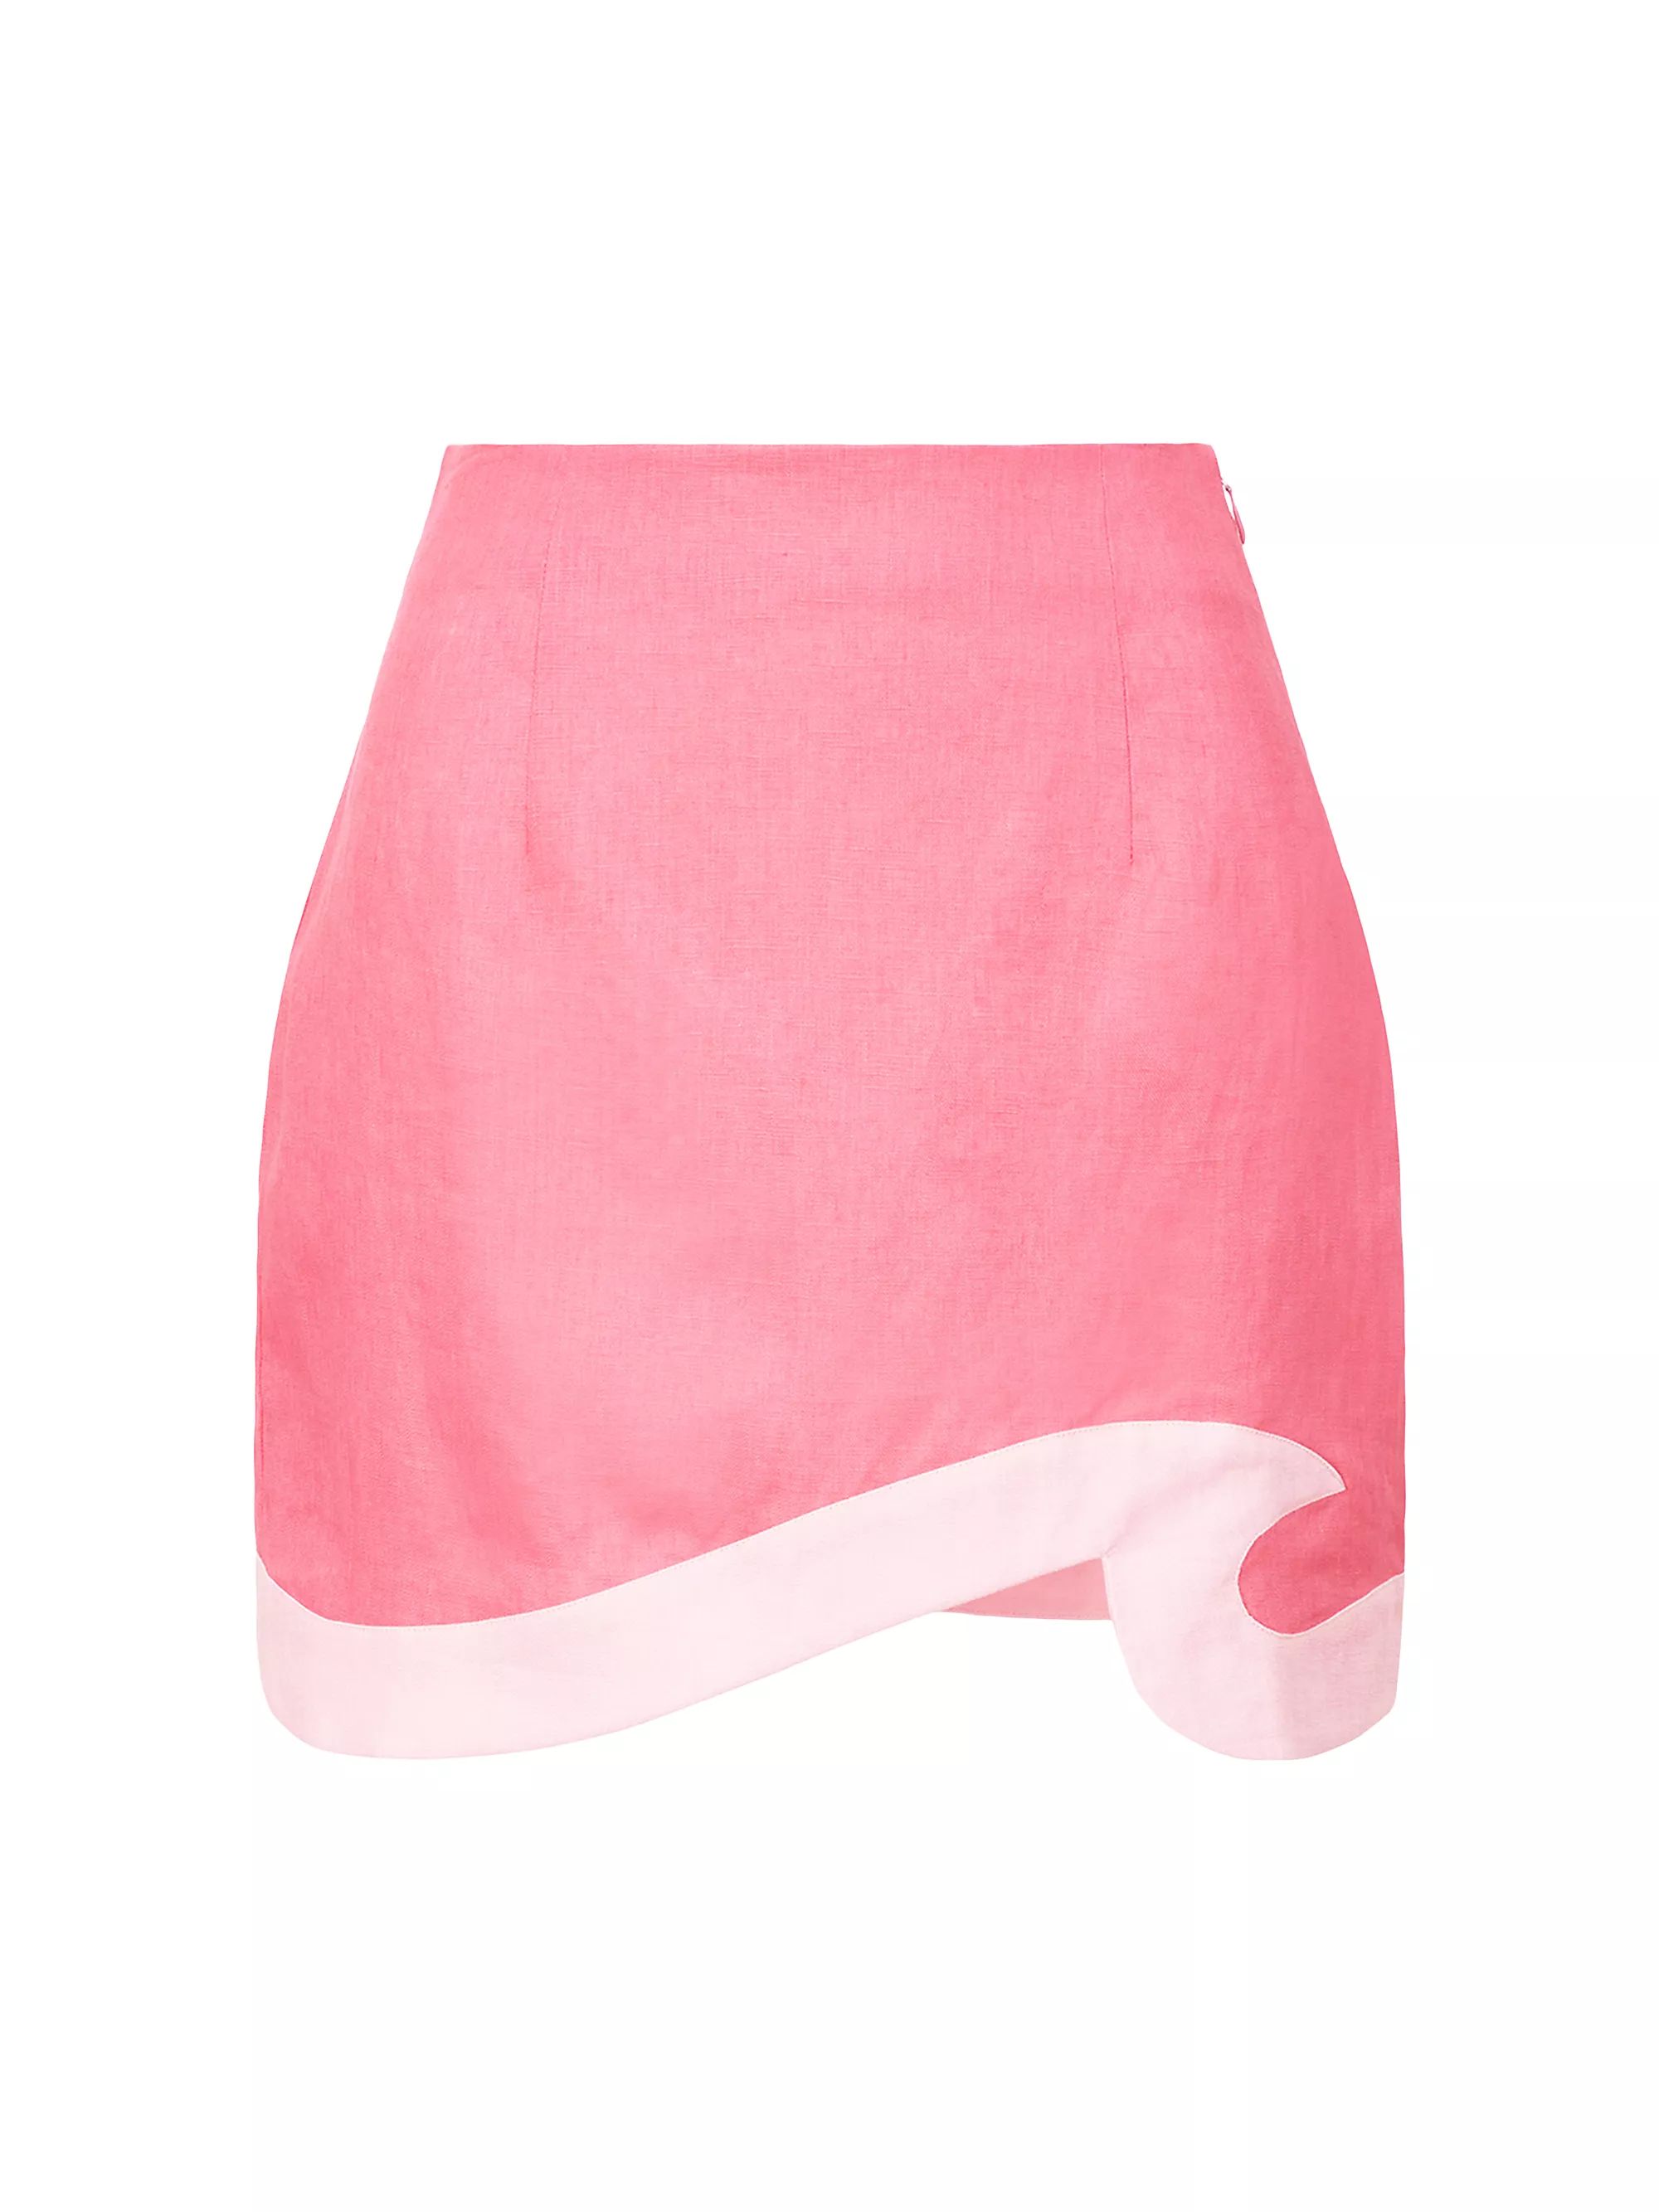 Coral Paradise Pearl PinkAll MiniOnly at SaksStaudLeandro Two-Tone Linen Miniskirt$225SELECT SIZE... | Saks Fifth Avenue